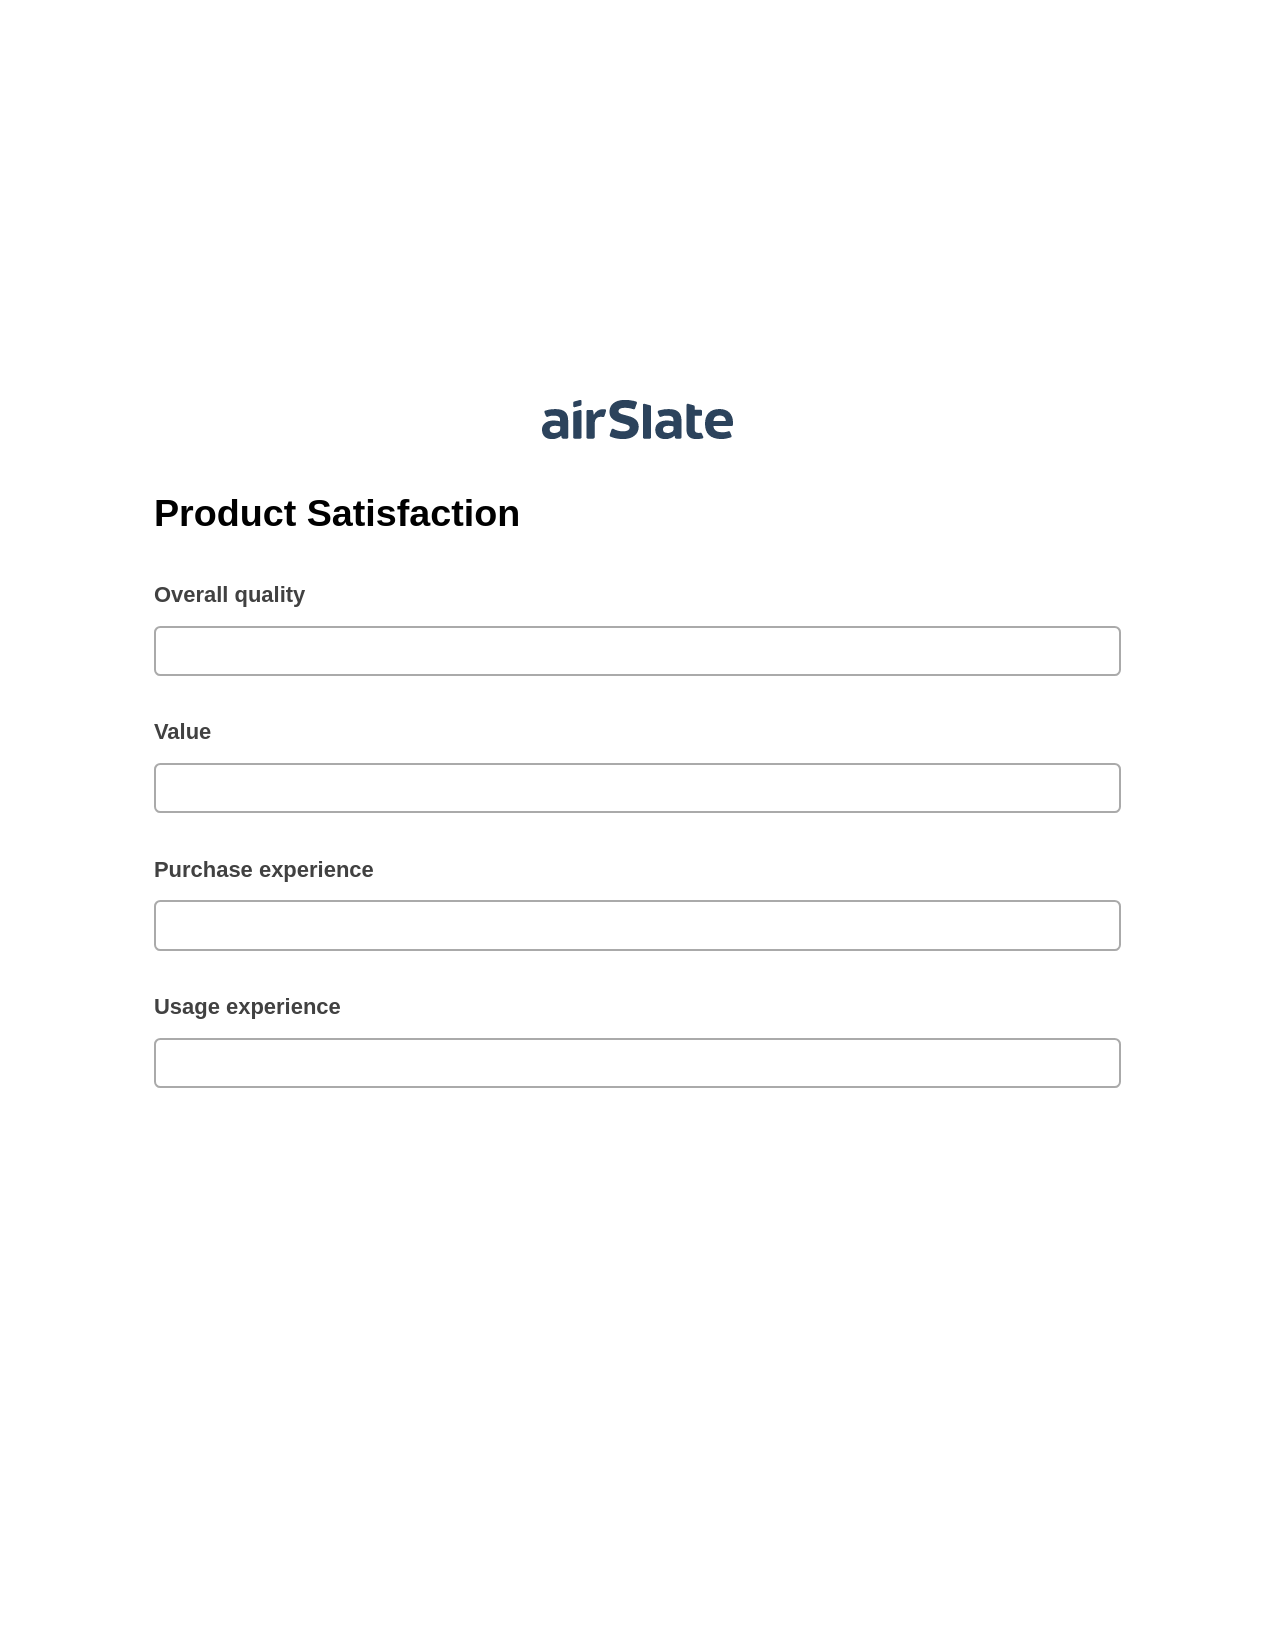 Multirole Product Satisfaction Pre-fill Document Bot, Lock the slate bot, Export to Excel 365 Bot